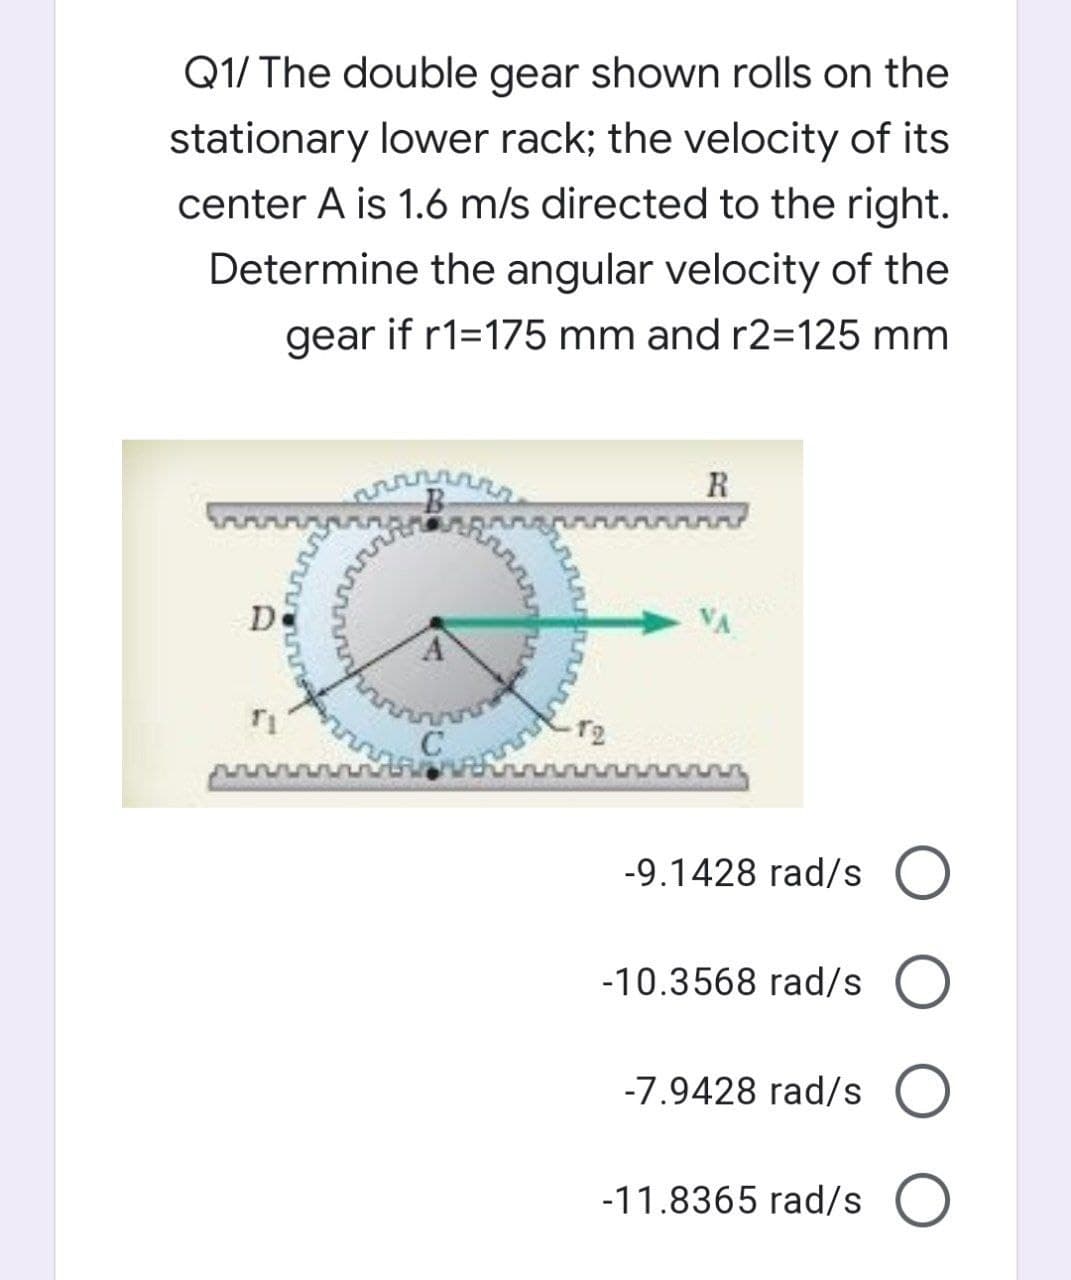 Q1/ The double gear shown rolls on the
stationary lower rack; the velocity of its
center A is 1.6 m/s directed to the right.
Determine the angular velocity of the
gear if r1=175 mm and r2=125 mm
R
-9.1428 rad/s O
-10.3568 rad/s O
-7.9428 rad/s O
-11.8365 rad/s O
